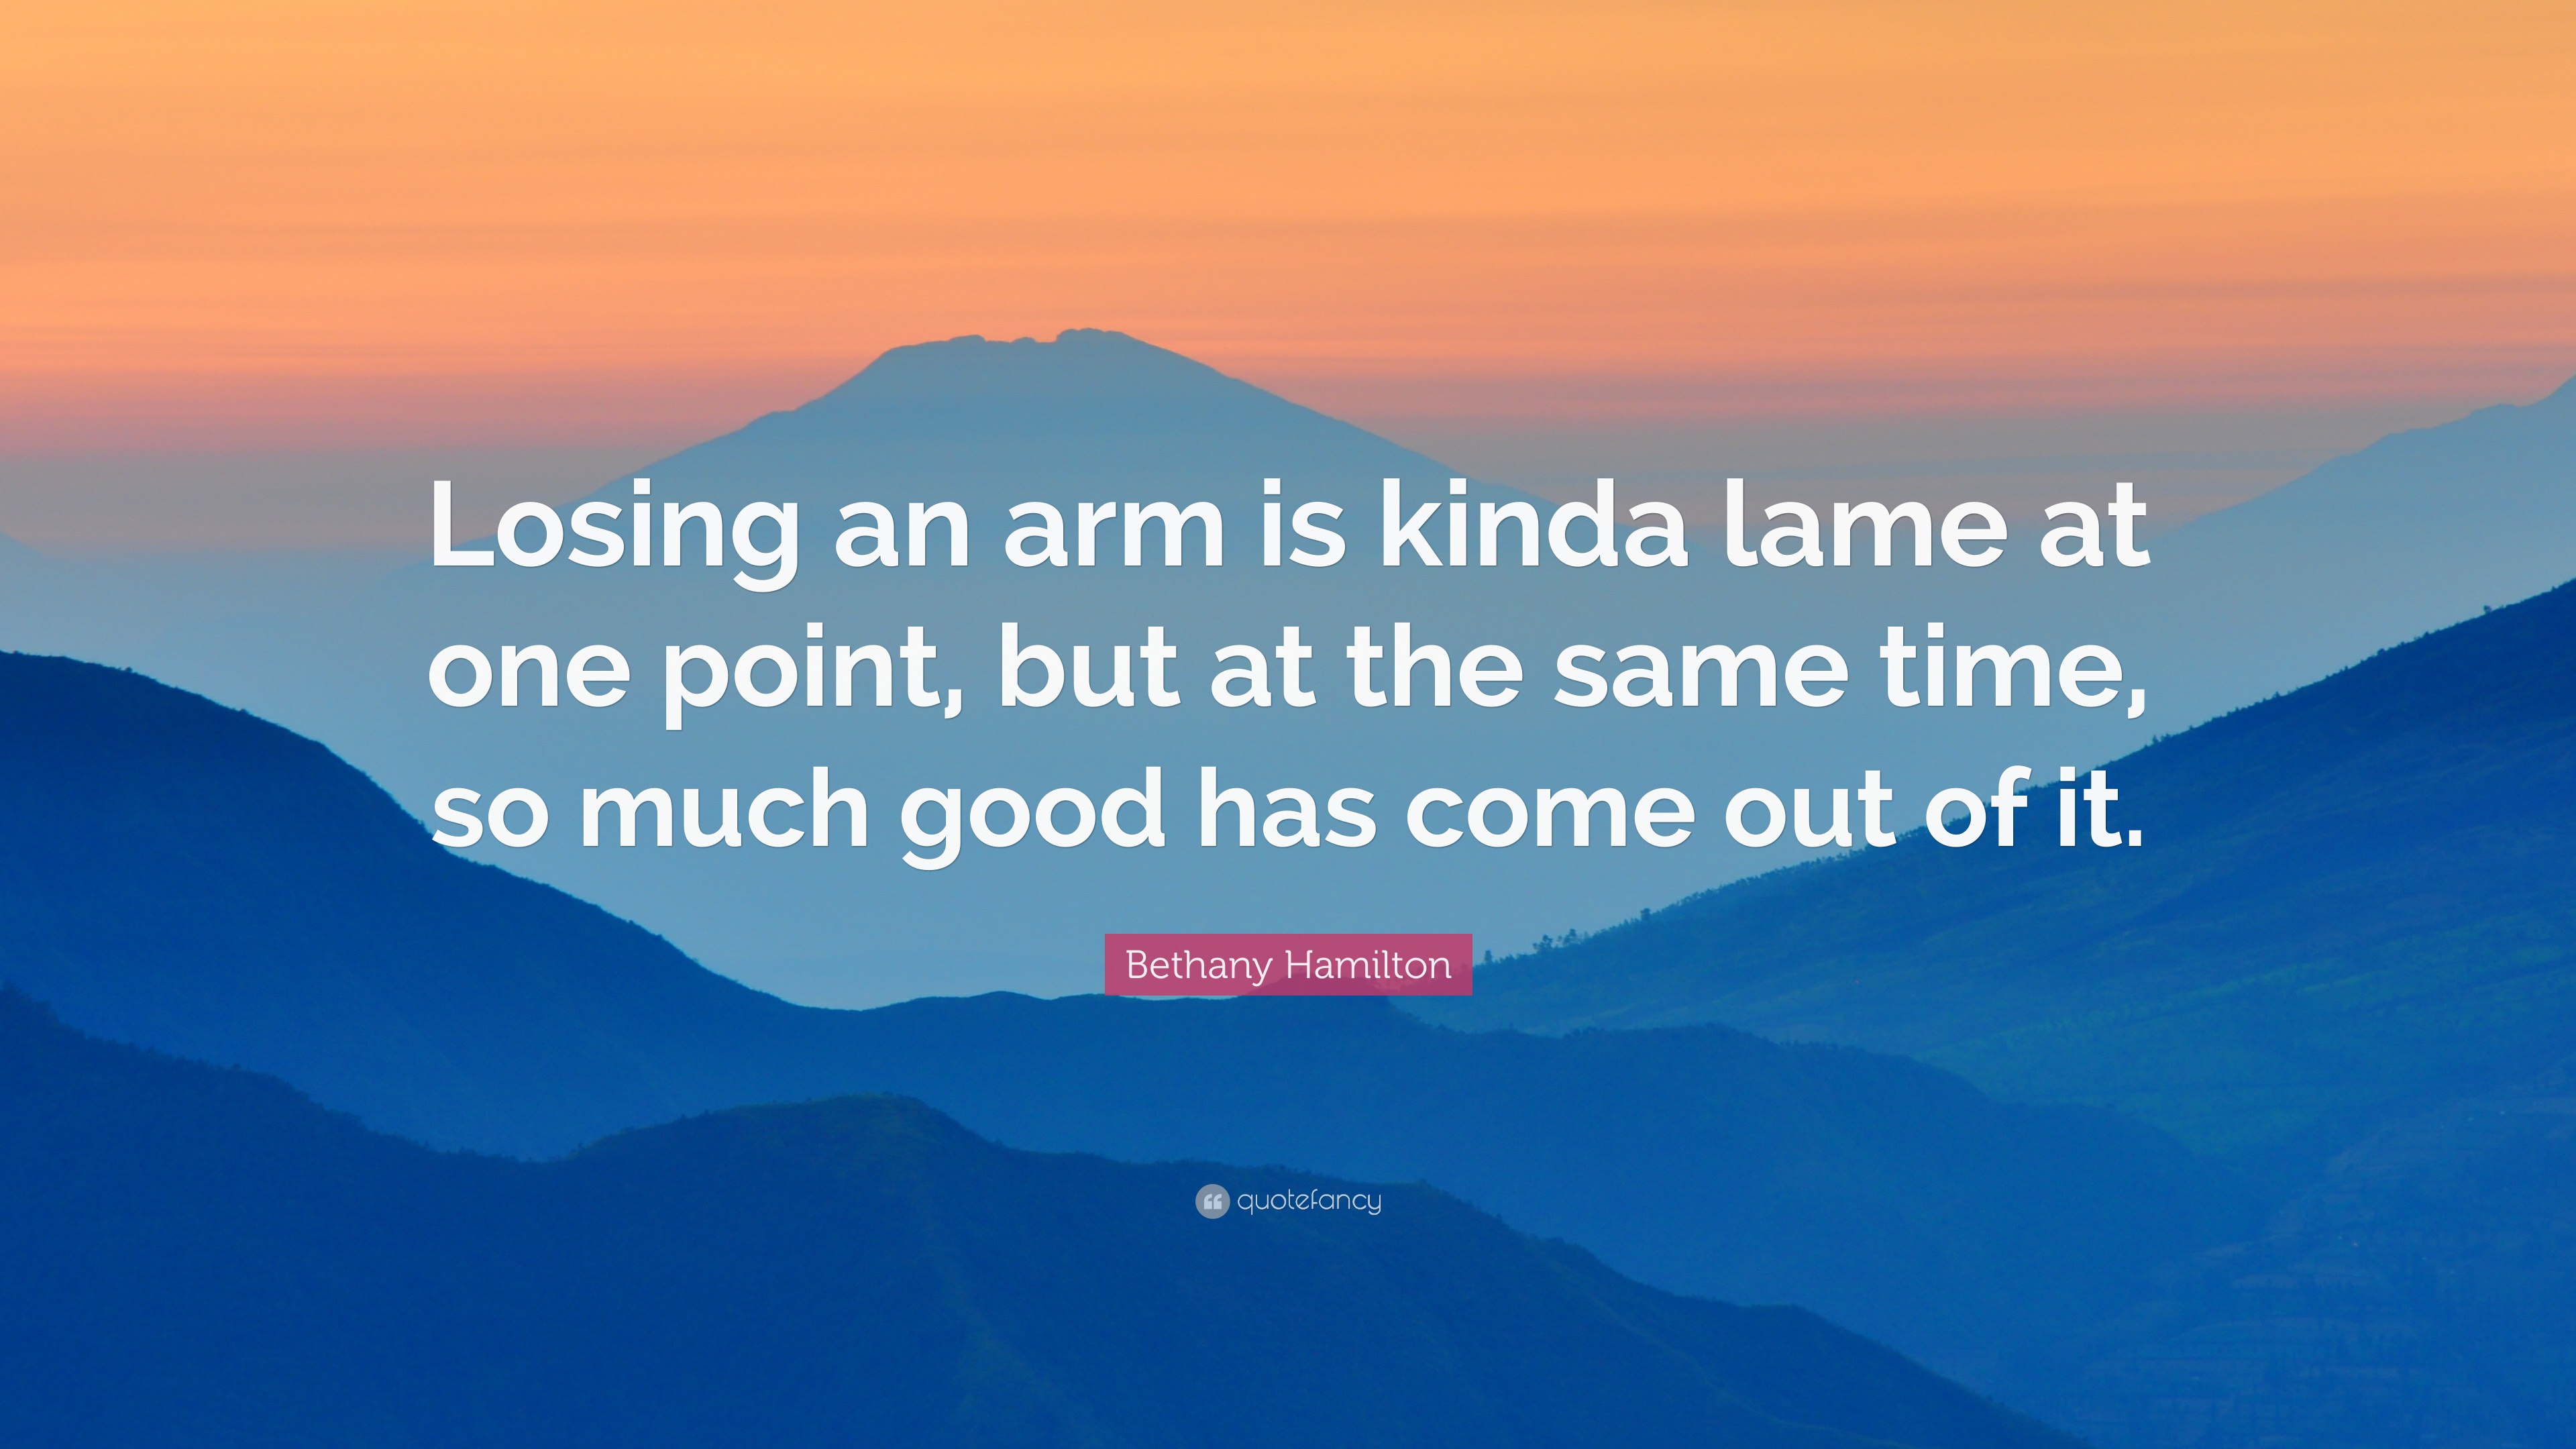 Bethany Hamilton Quote: “Losing an arm is kinda lame at one point